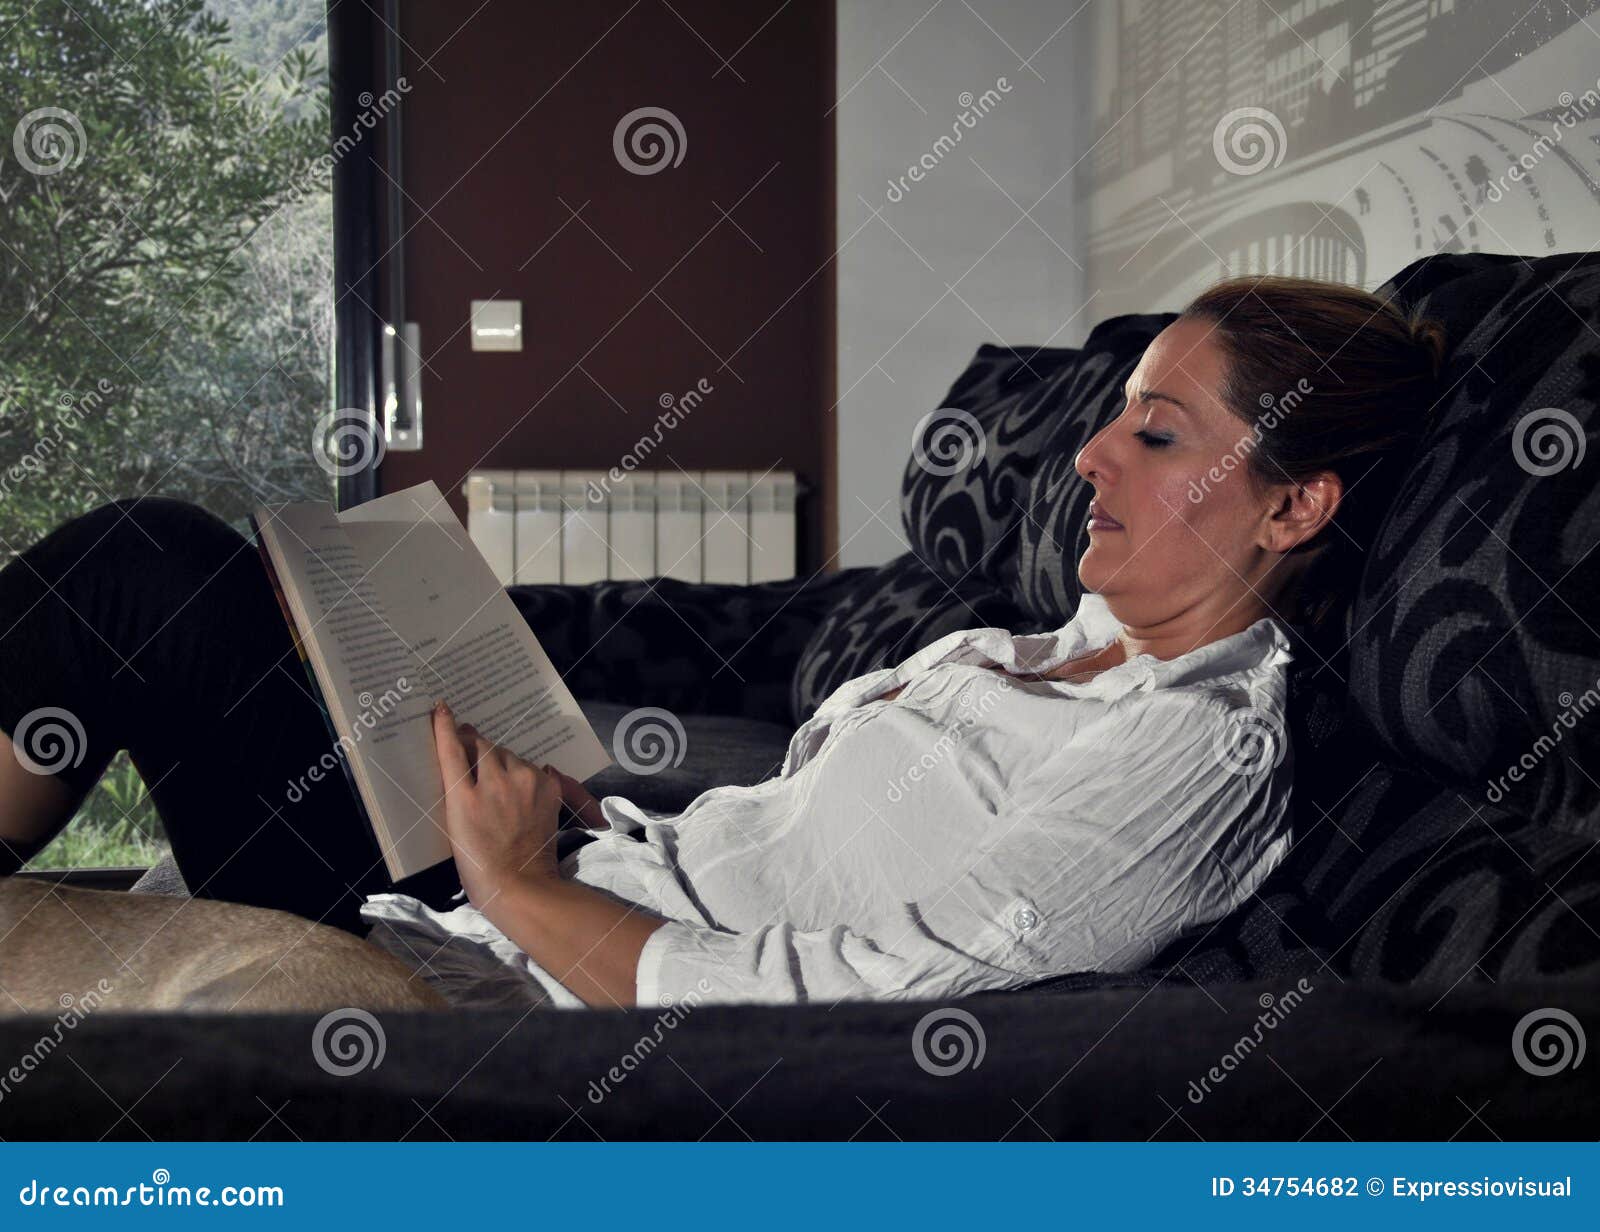 woman reading on the sofa quietly